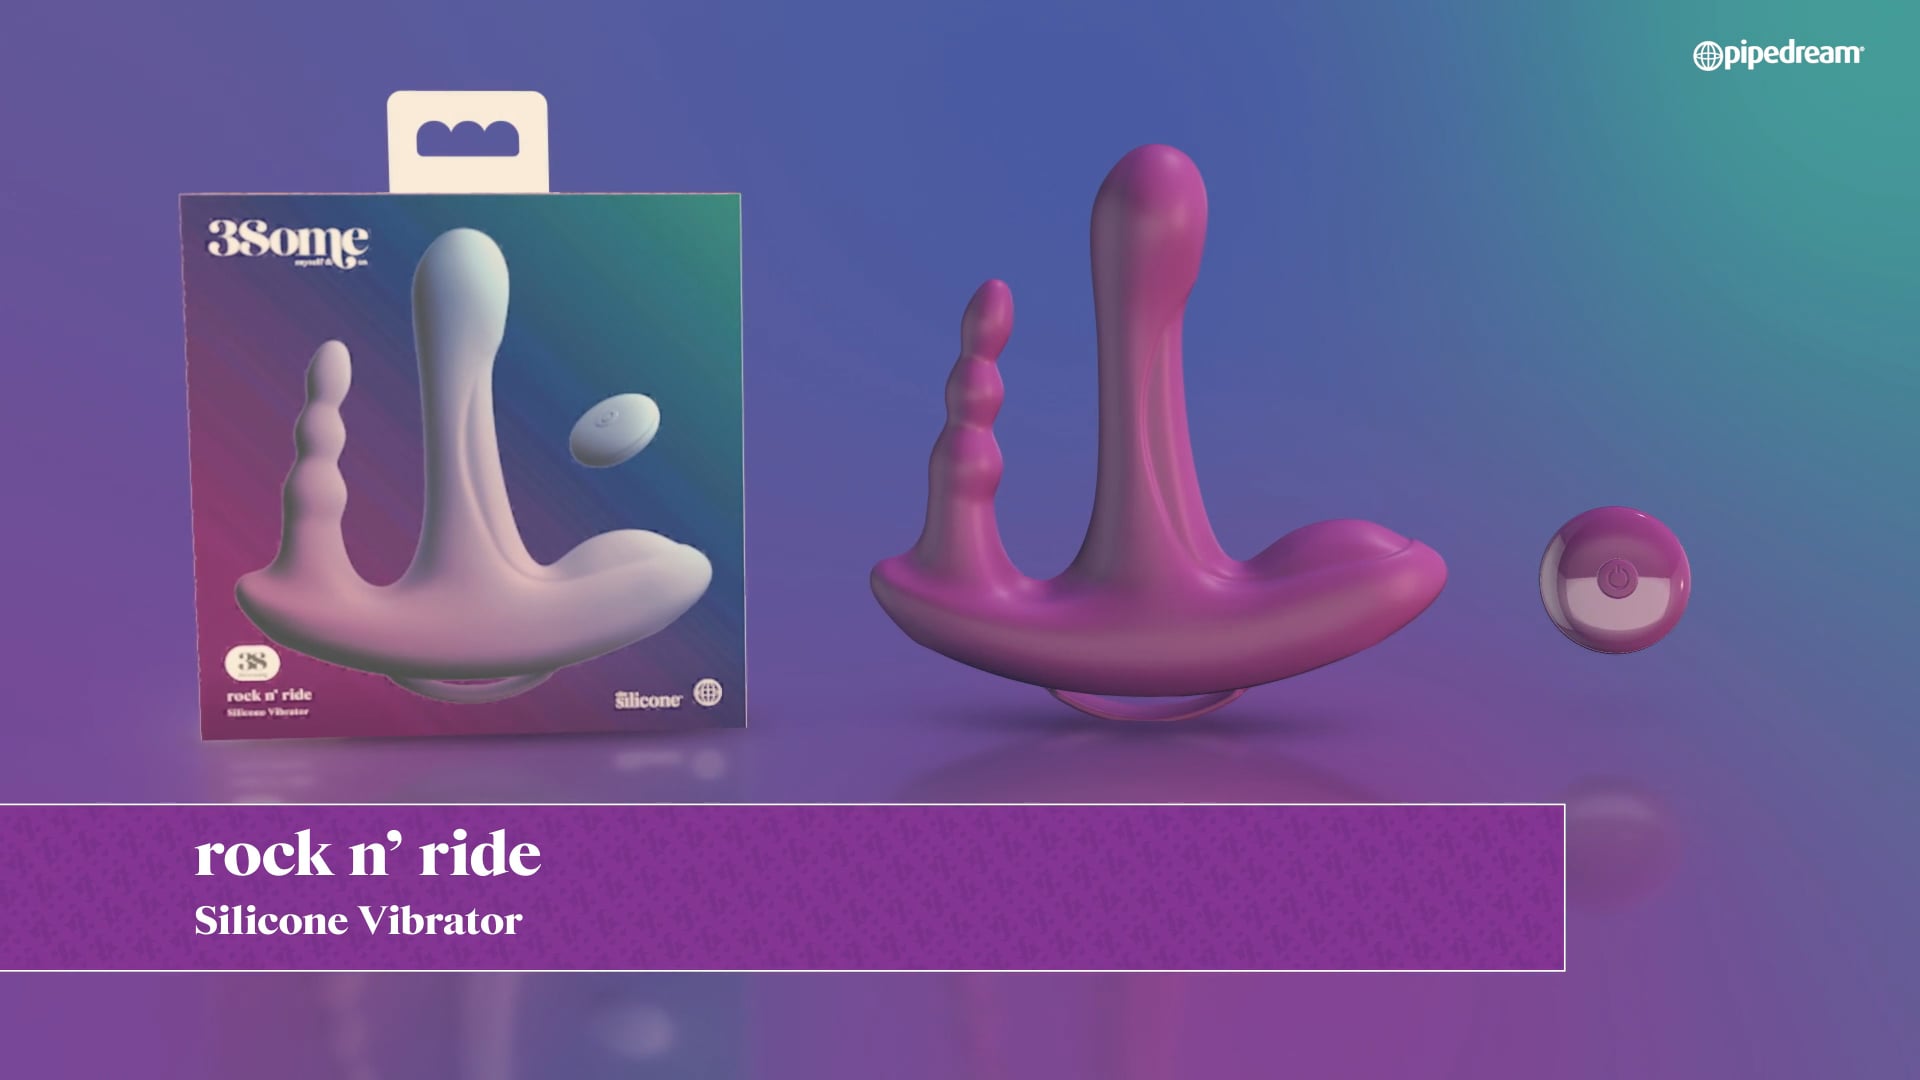 7076 3Some Rock N Ride- Silicone Vibrator by Pipedream Products on Vimeo